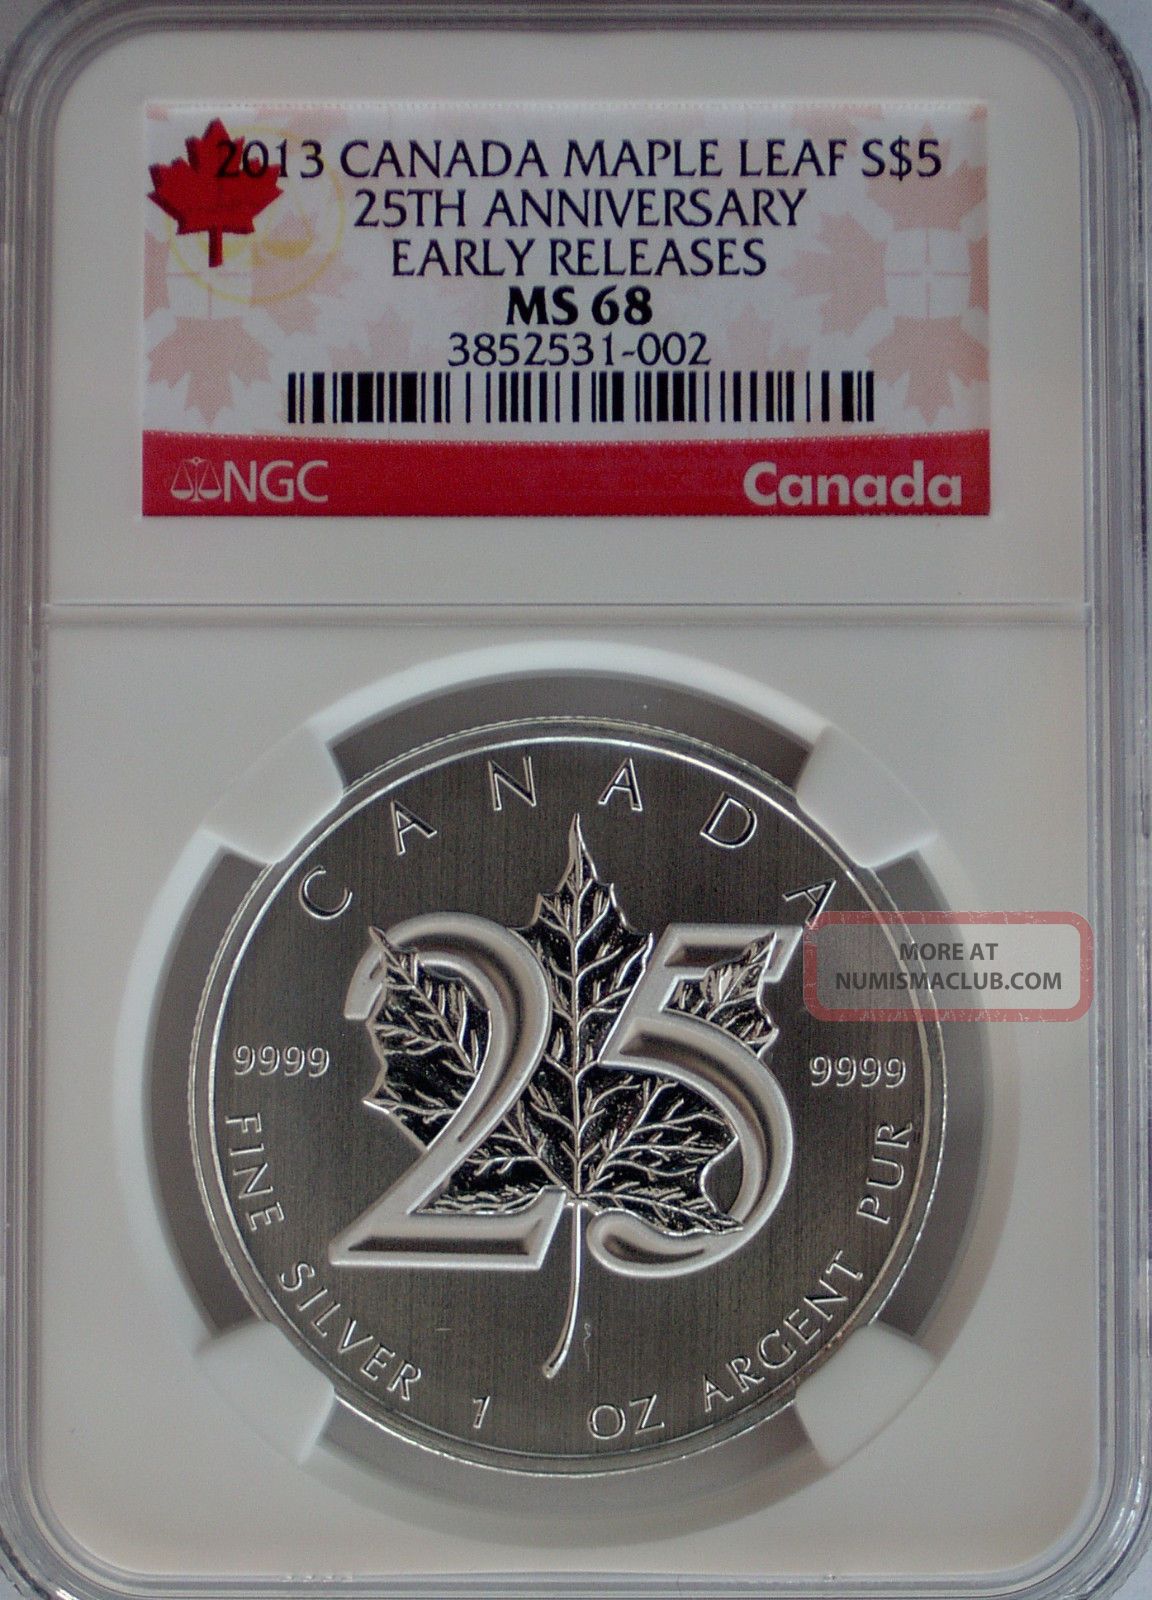 Ngc Canada 2013 Maple Leaf 25th Anniversary $5 Coin Ms68 Silver 1 Oz